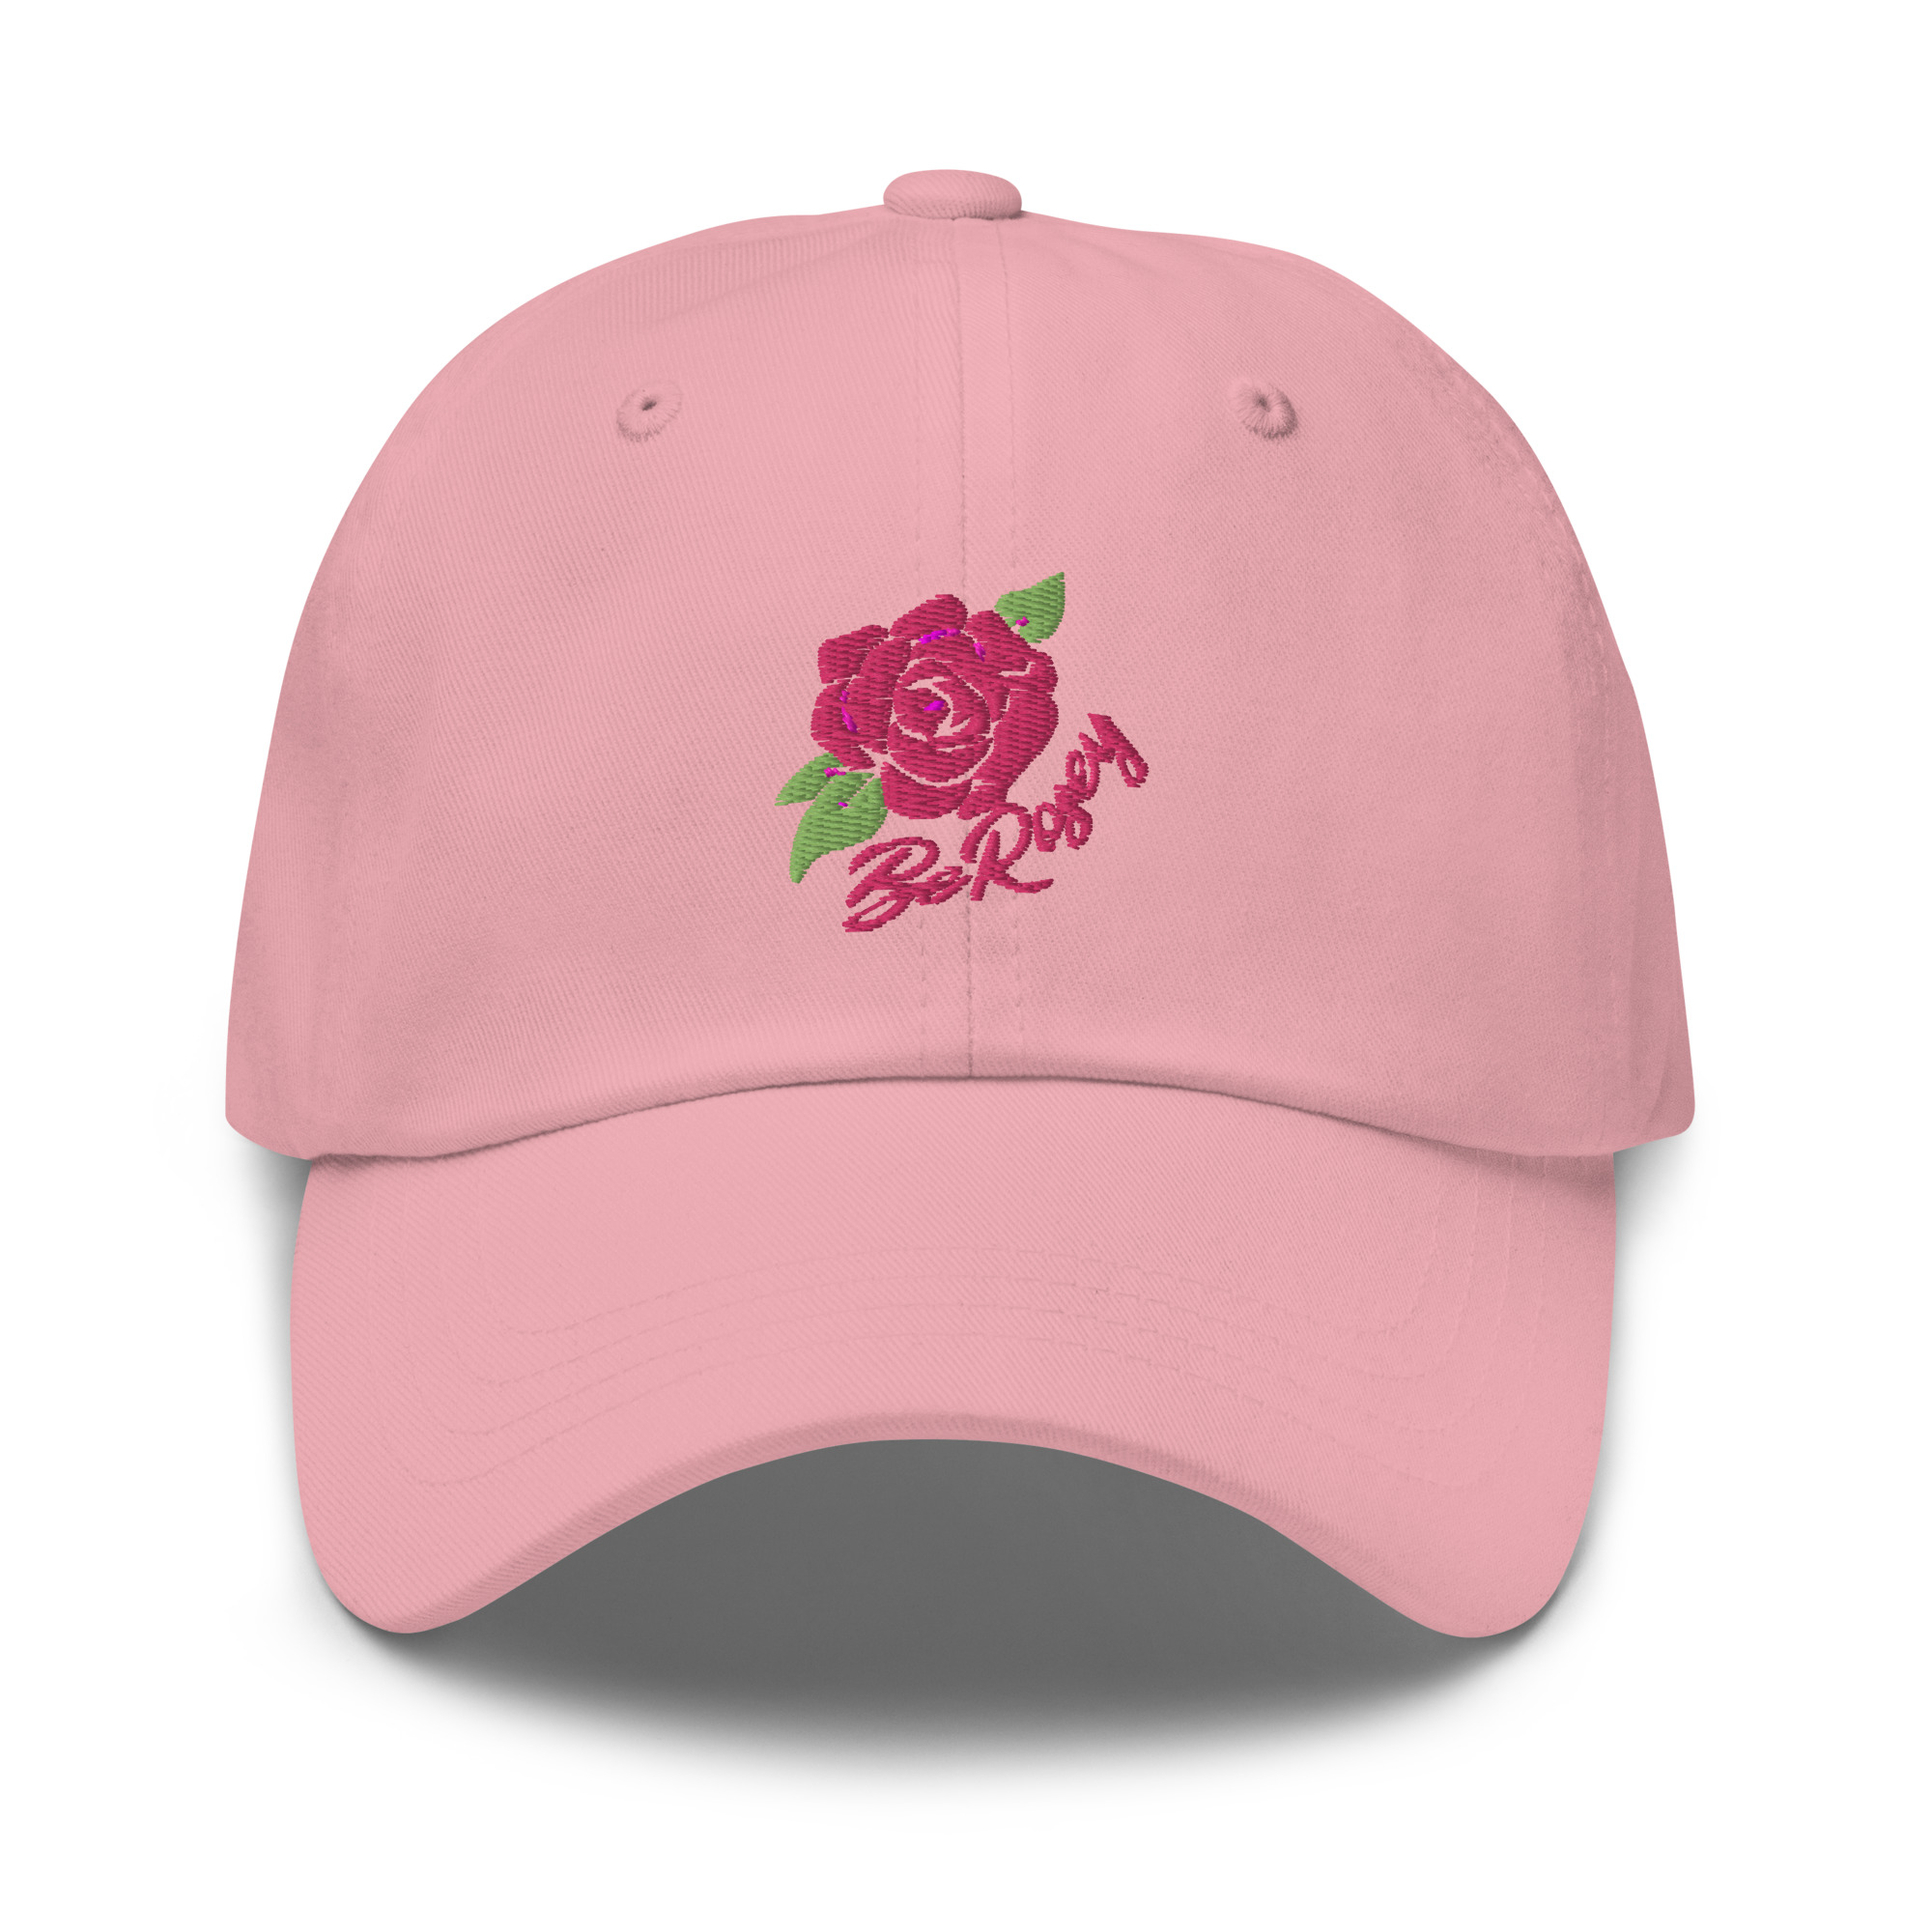 classic-dad-hat-pink-front-63e6b6daba928.jpg